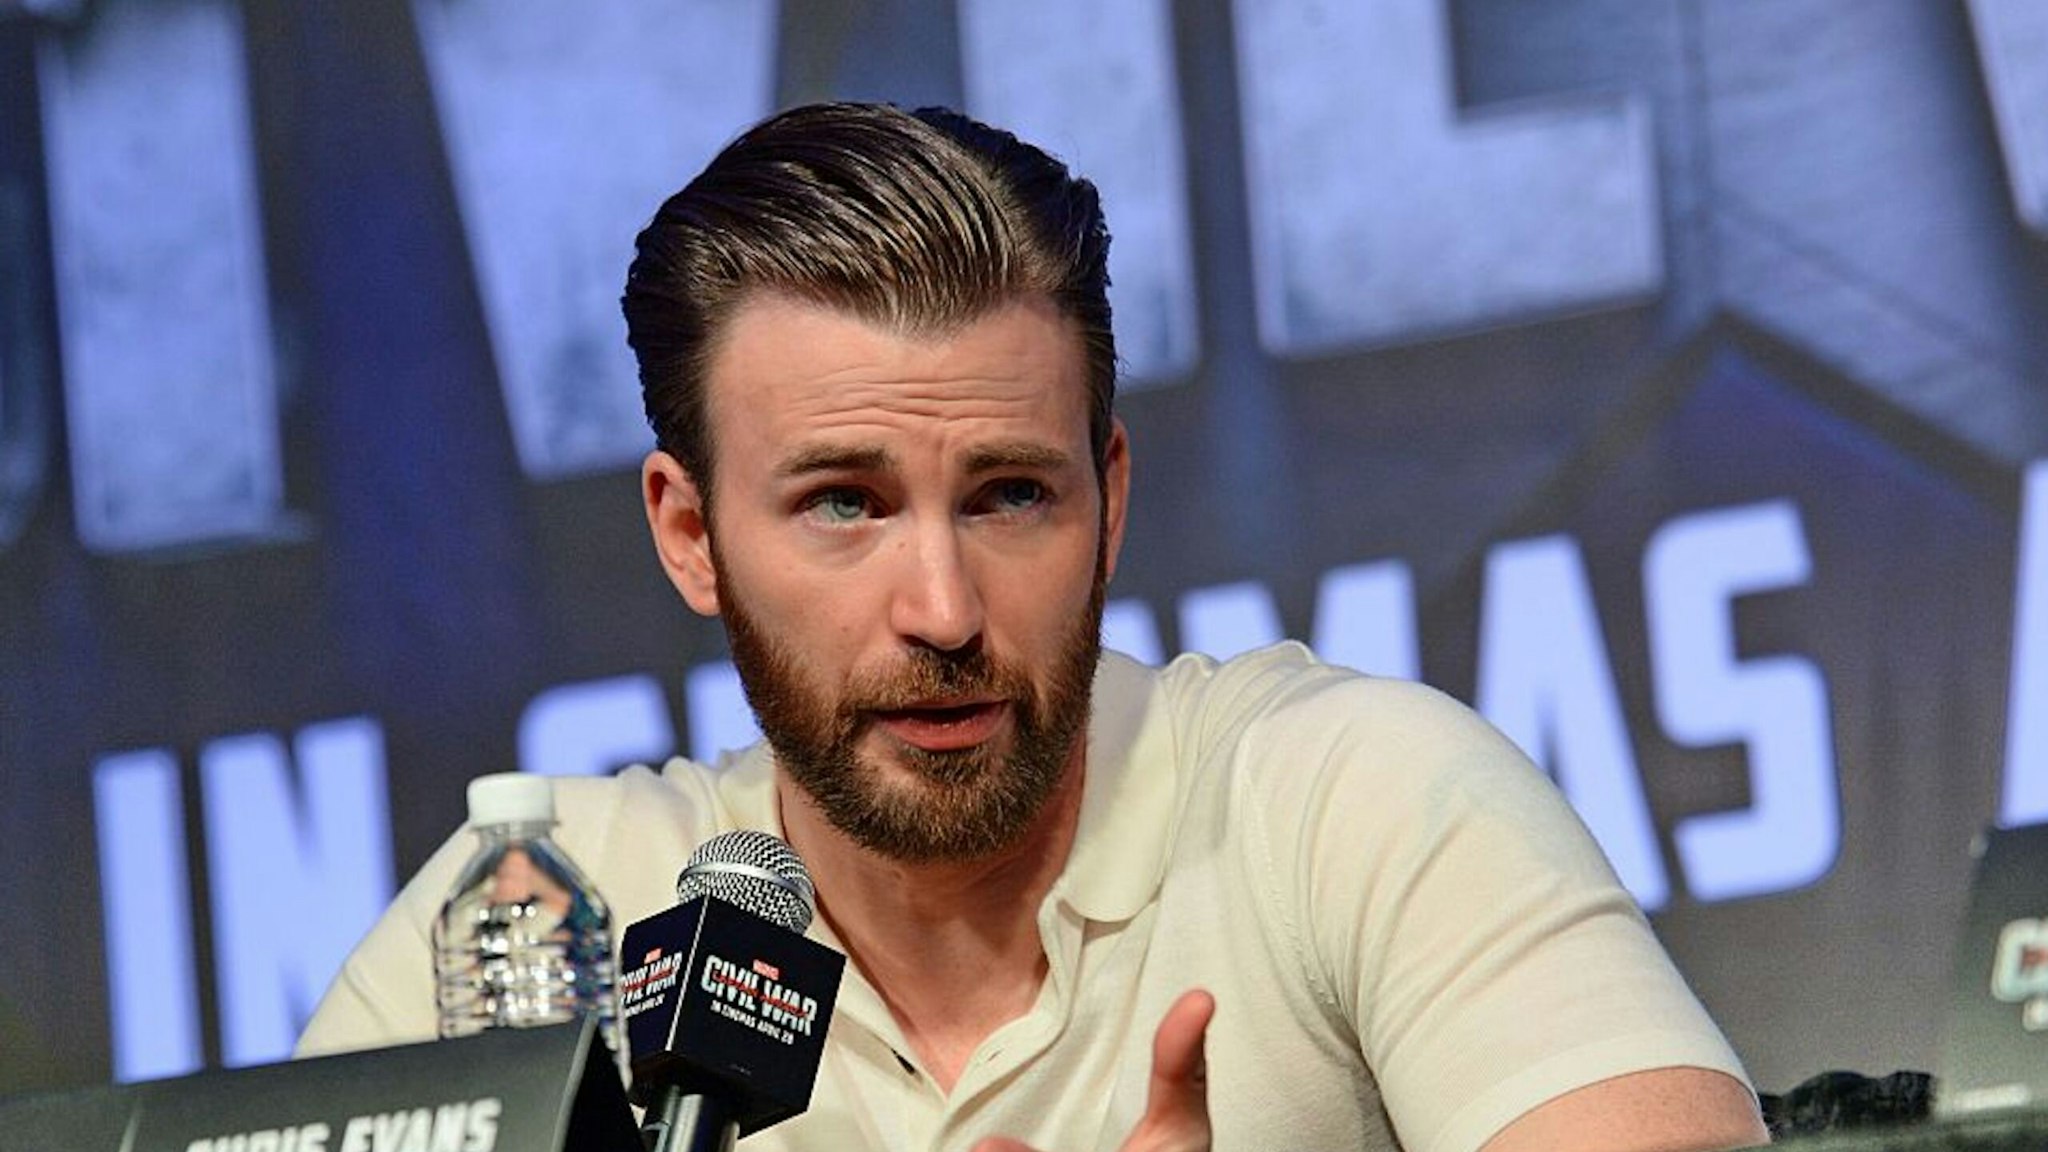 US actor Chris Evans attends a press conference at Marina Bay Sands in Singapore on April 21, 2016, during a press tour to promote the latest Marvel installment, Captain America: Civil War which will hit the screens on April 28. Director Joe Russo and US actors Sebastian Stan, Chris Evans and Anthony Mackie are in Singapore for the press tour.